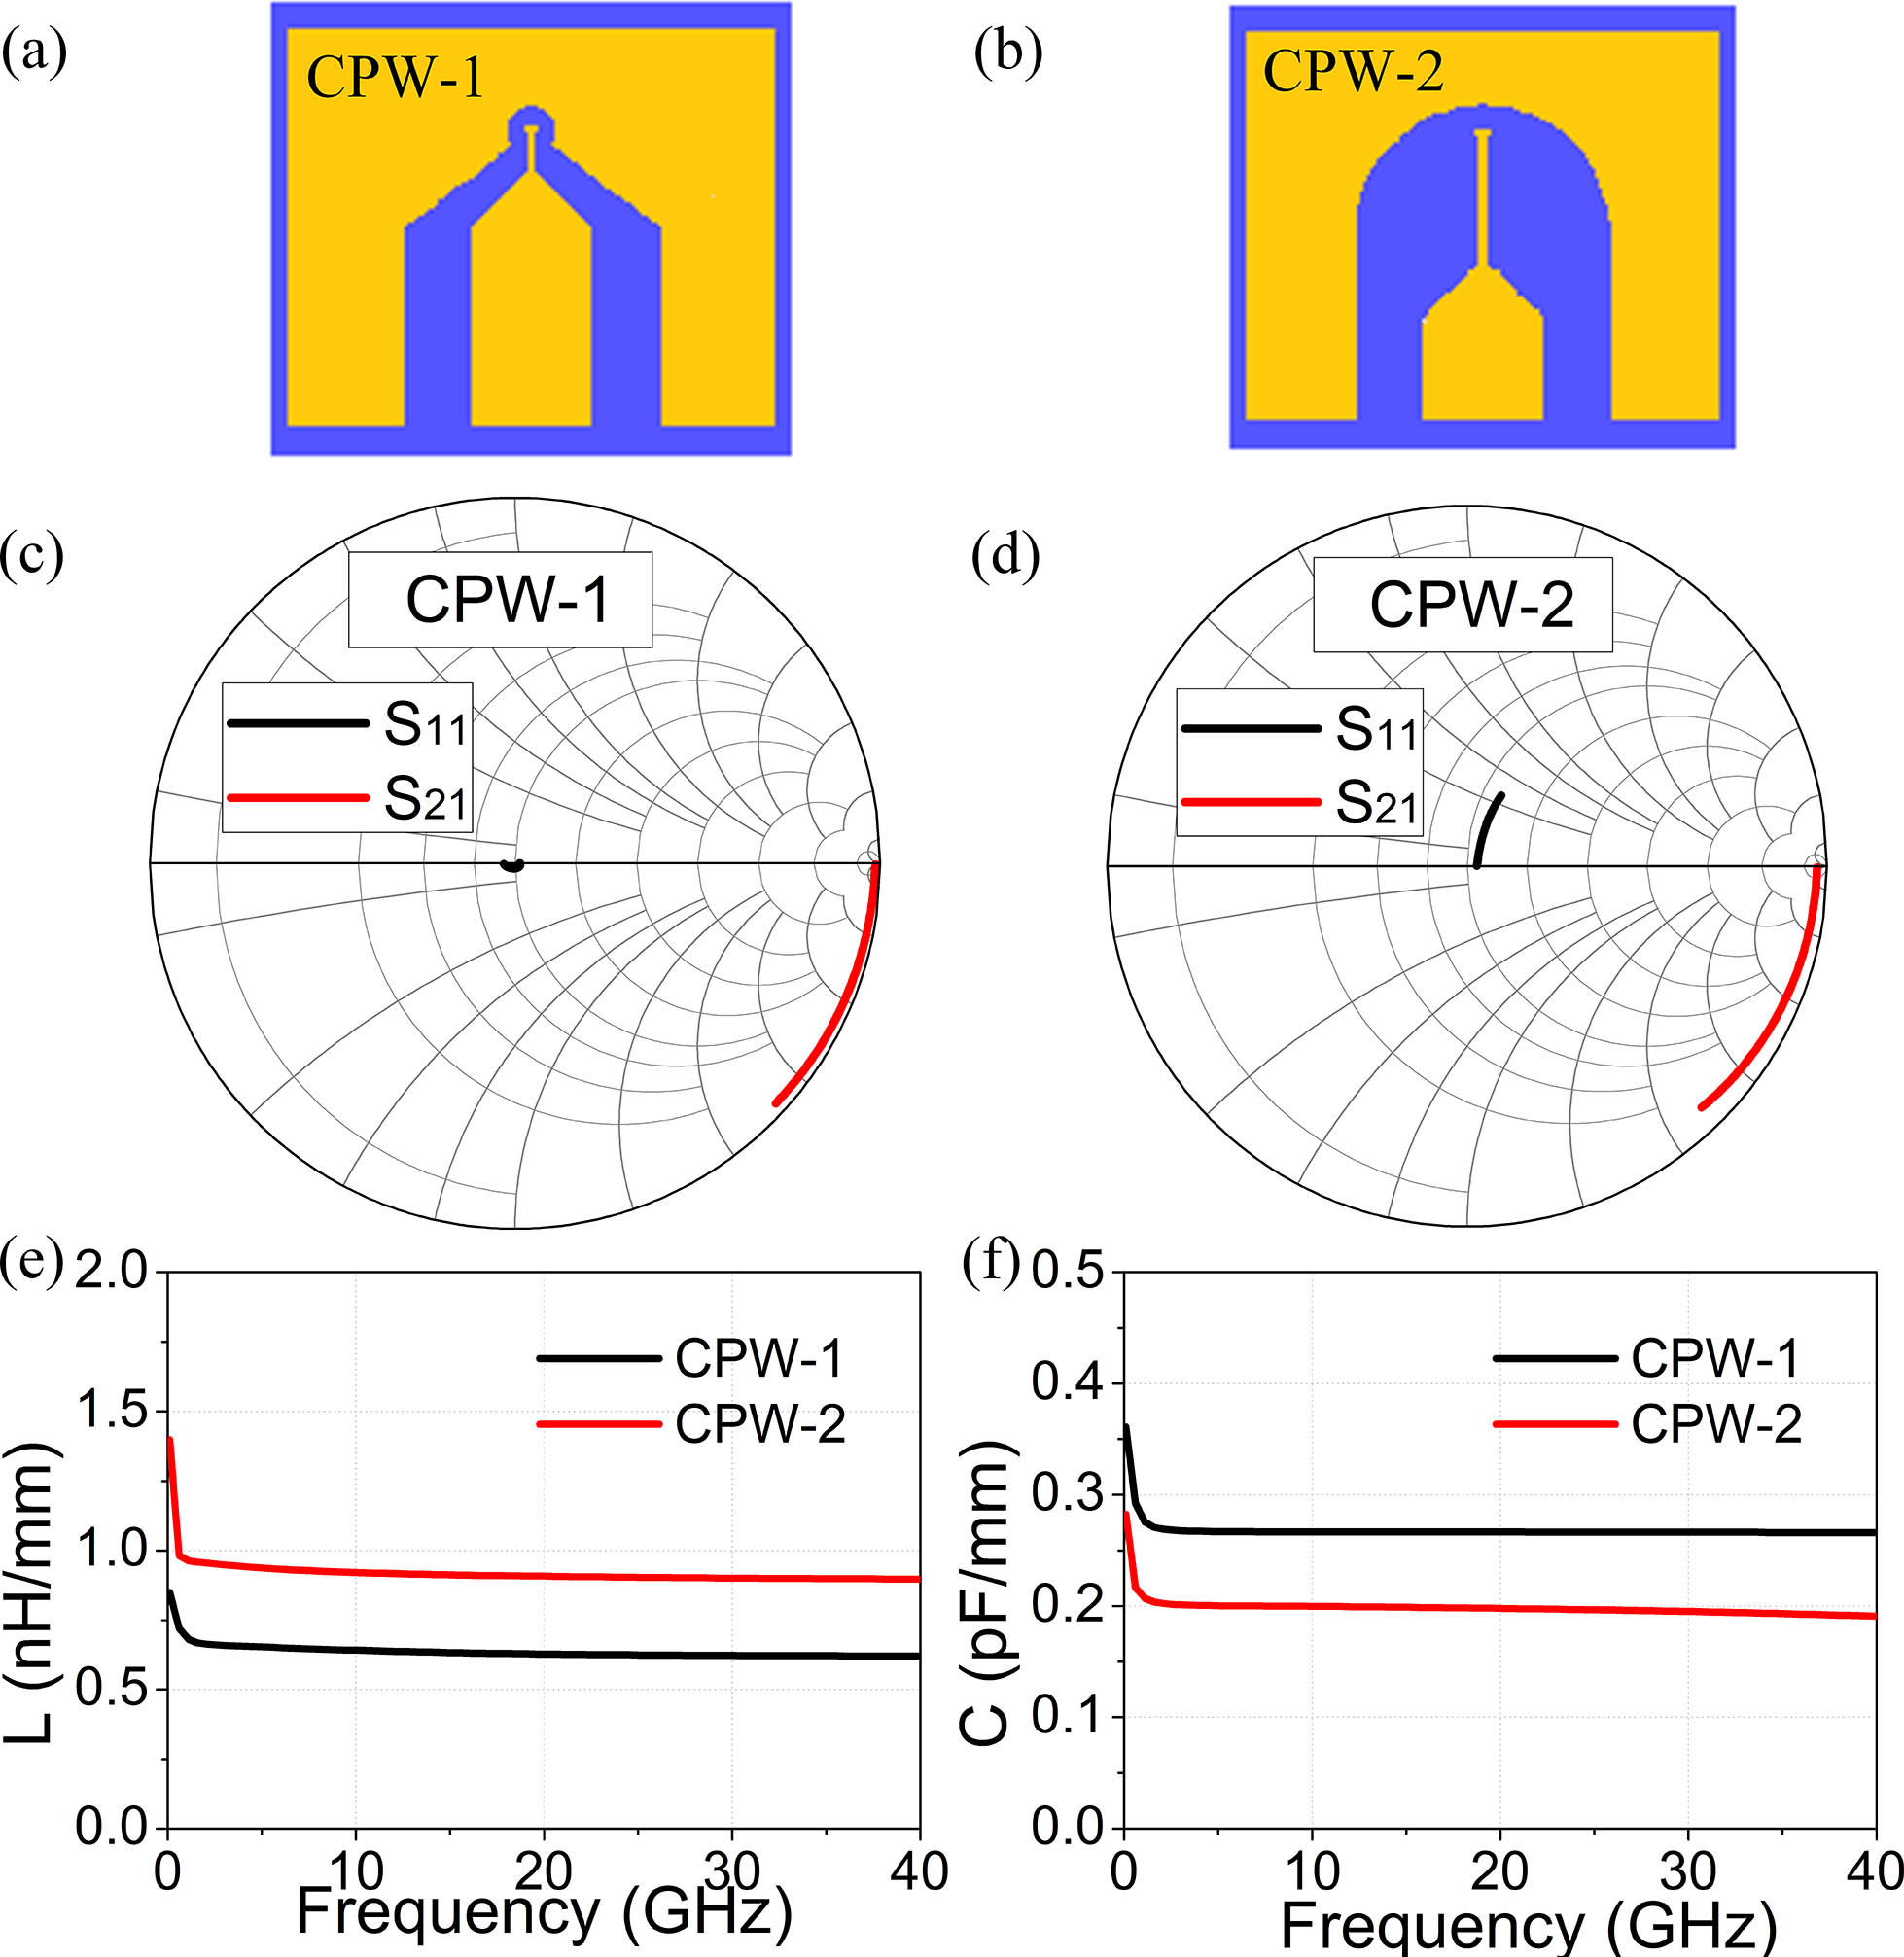 Two different CPW structures: (a) CPW-1 with 50 Ω impedance; (b) CPW-2 containing an inductive high-impedance part. The FEM simulated S11 and S21 parameters of (c) CPW-1 and (d) CPW-2 up to 40 GHz. The extracted distributed parameters (e) L and (f) C of the designed CPW-1 and CPW-2.